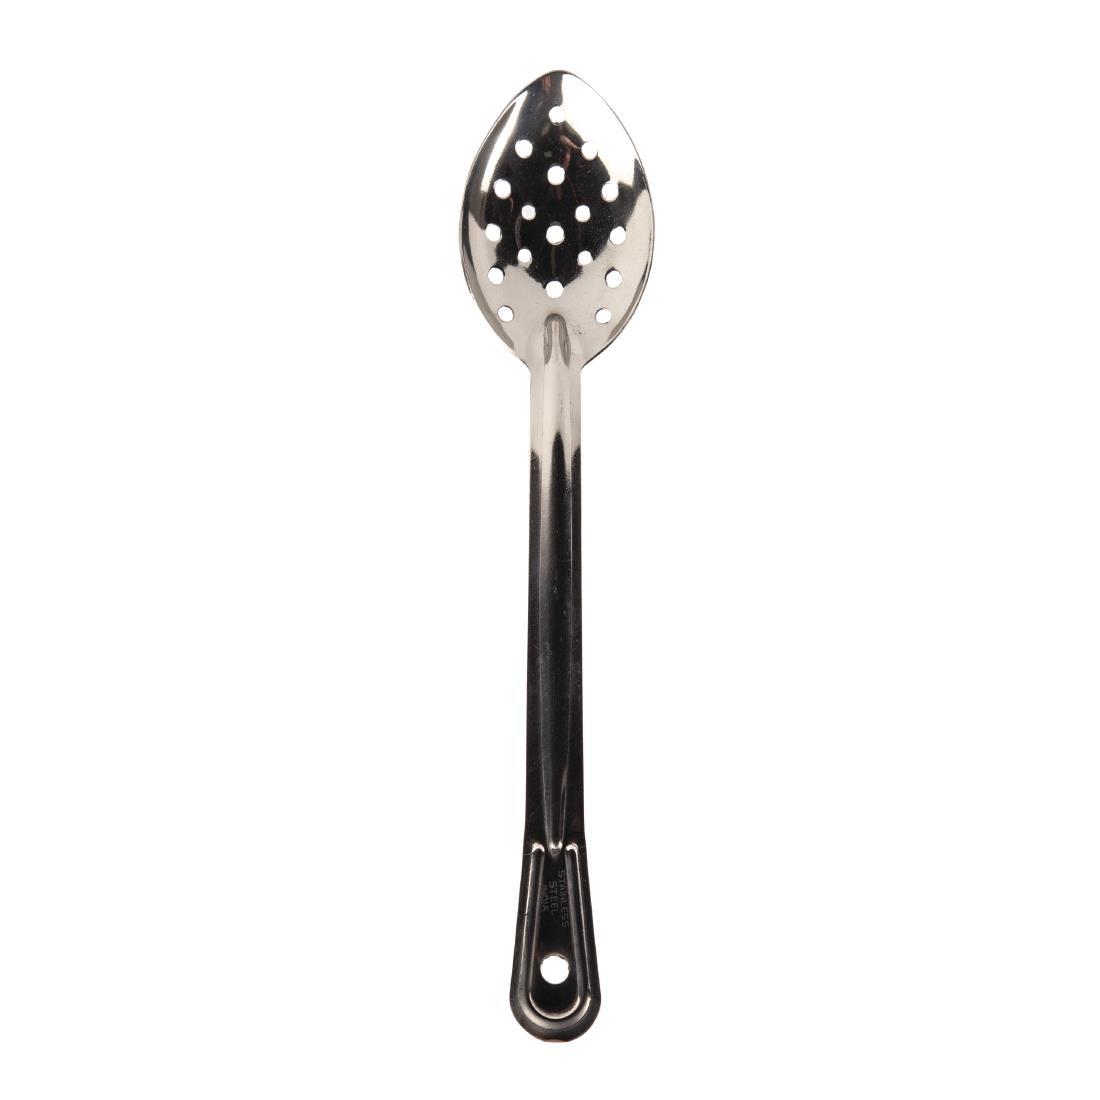 Vogue Stainless Steel Perforated Serving Spoon - J640  - 2